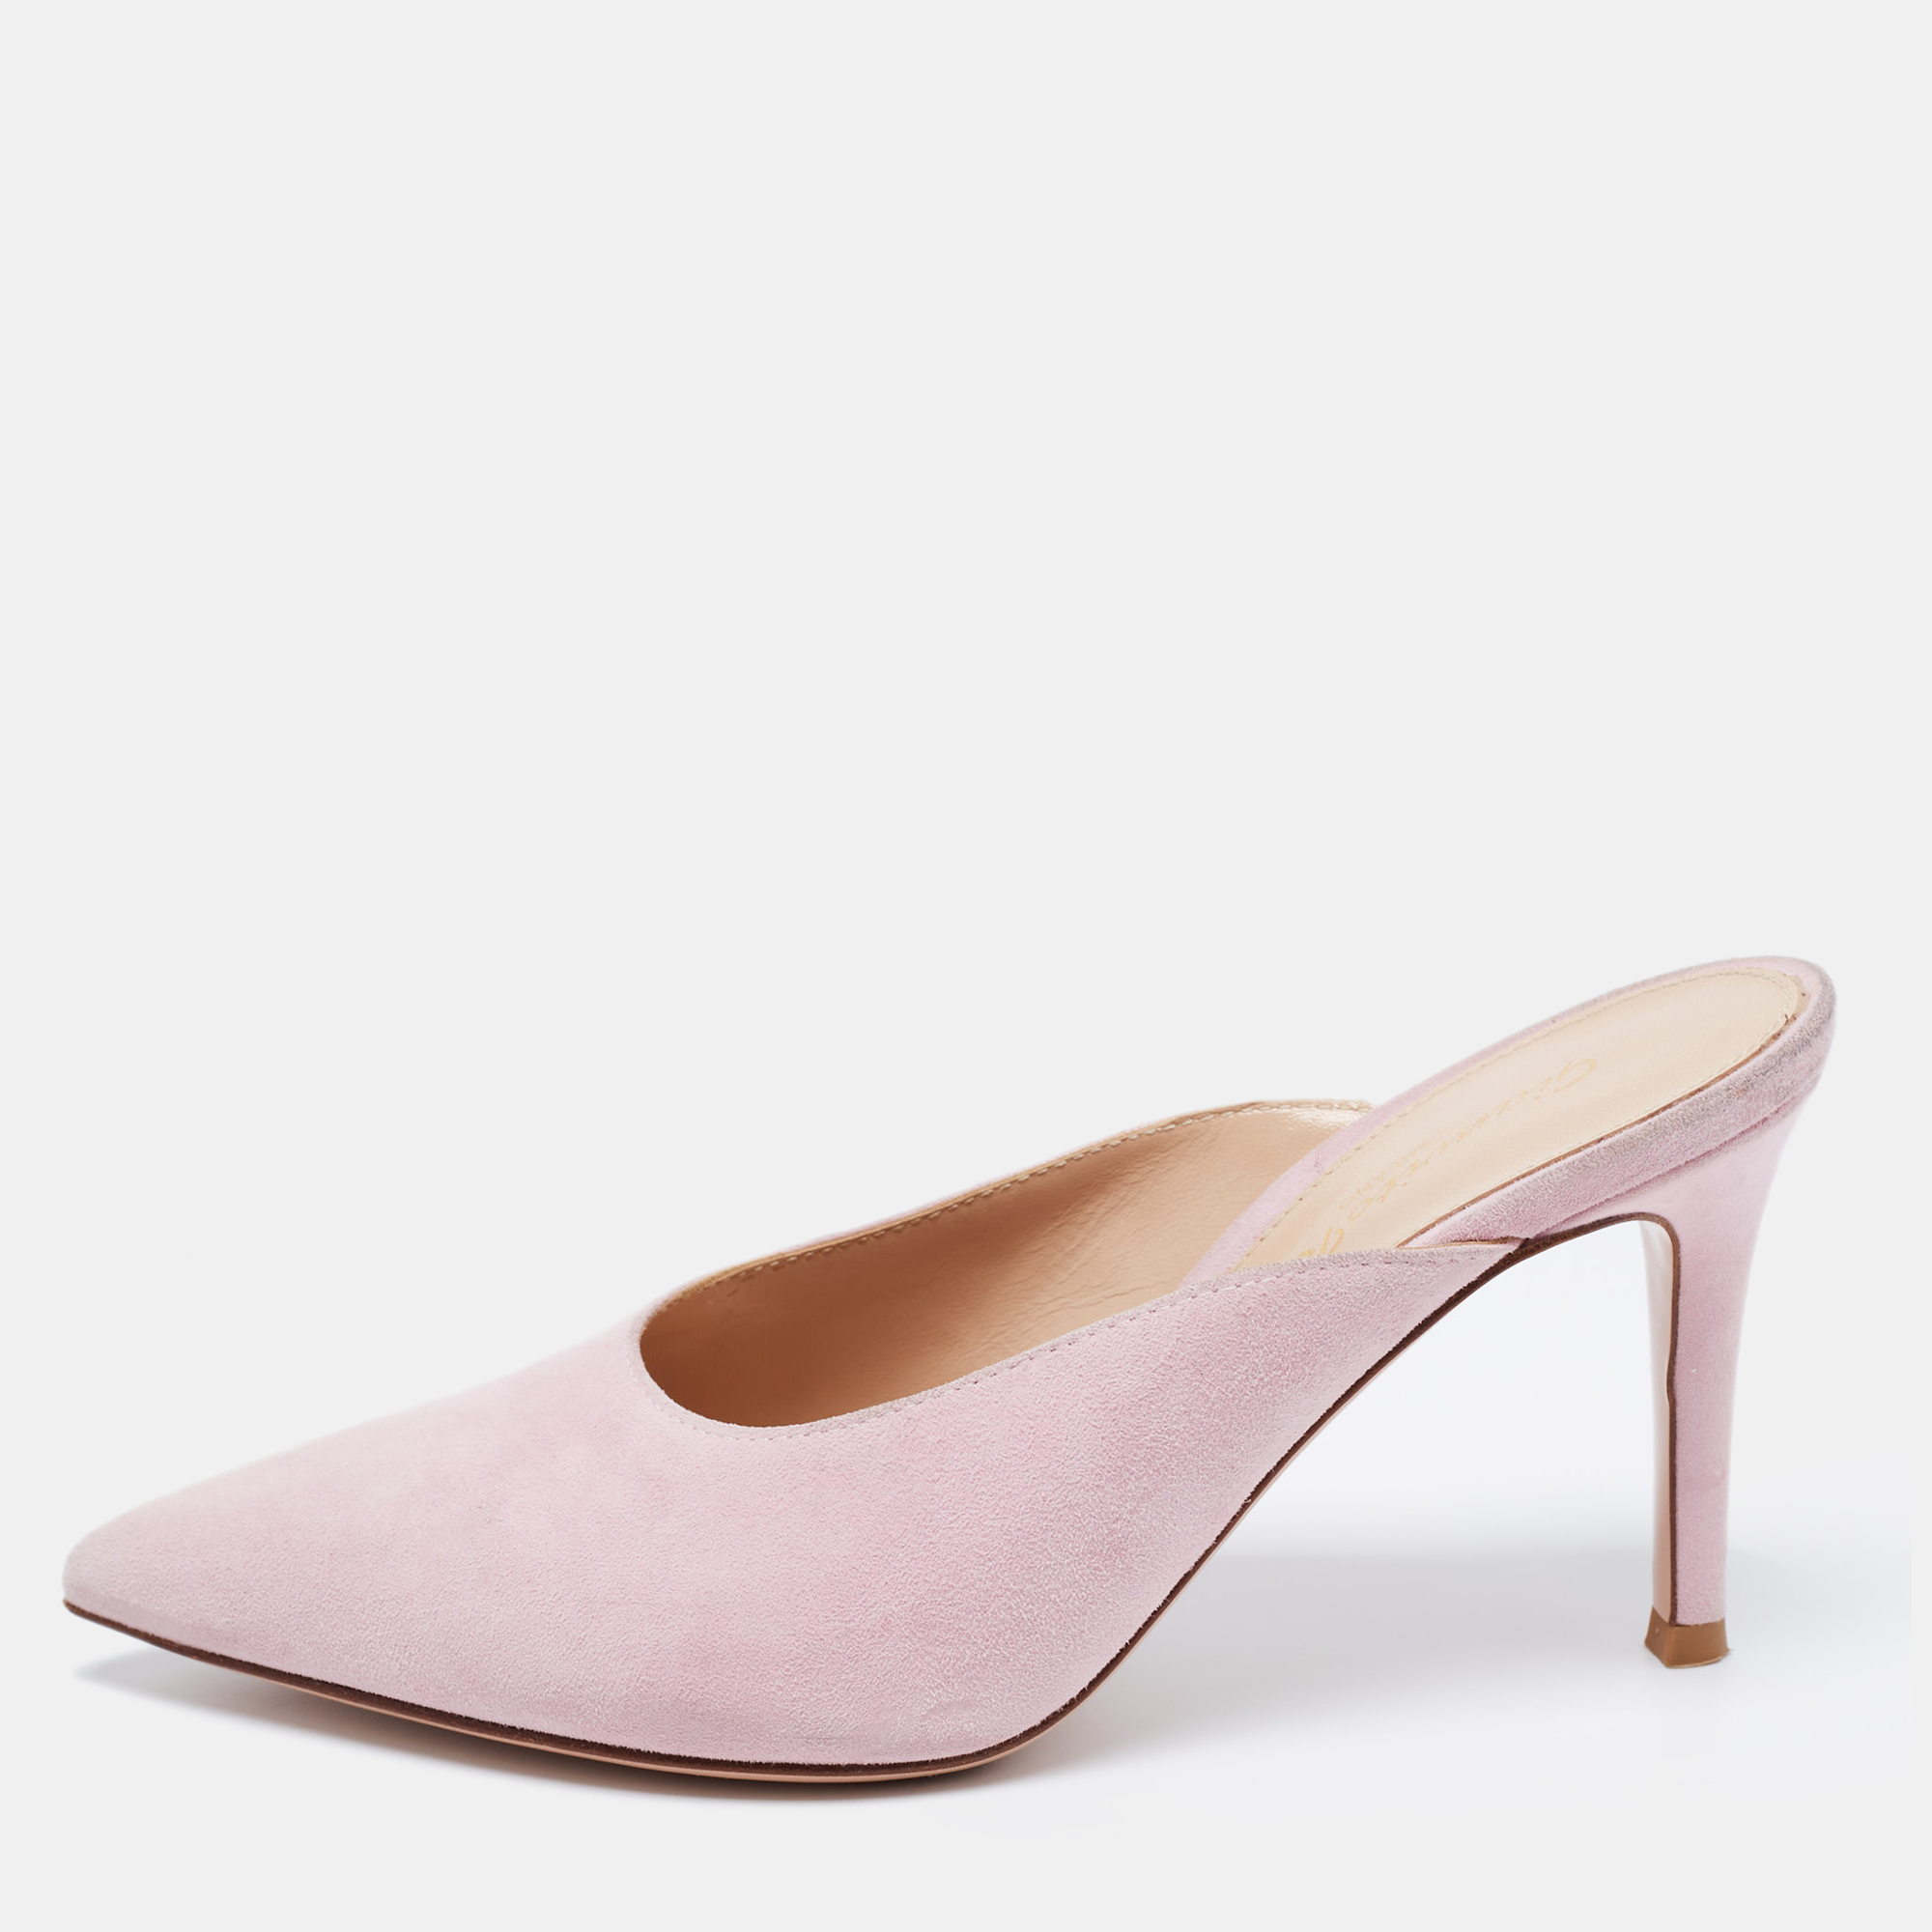 Gianvito rossi pink suede pointed toe mules size 34